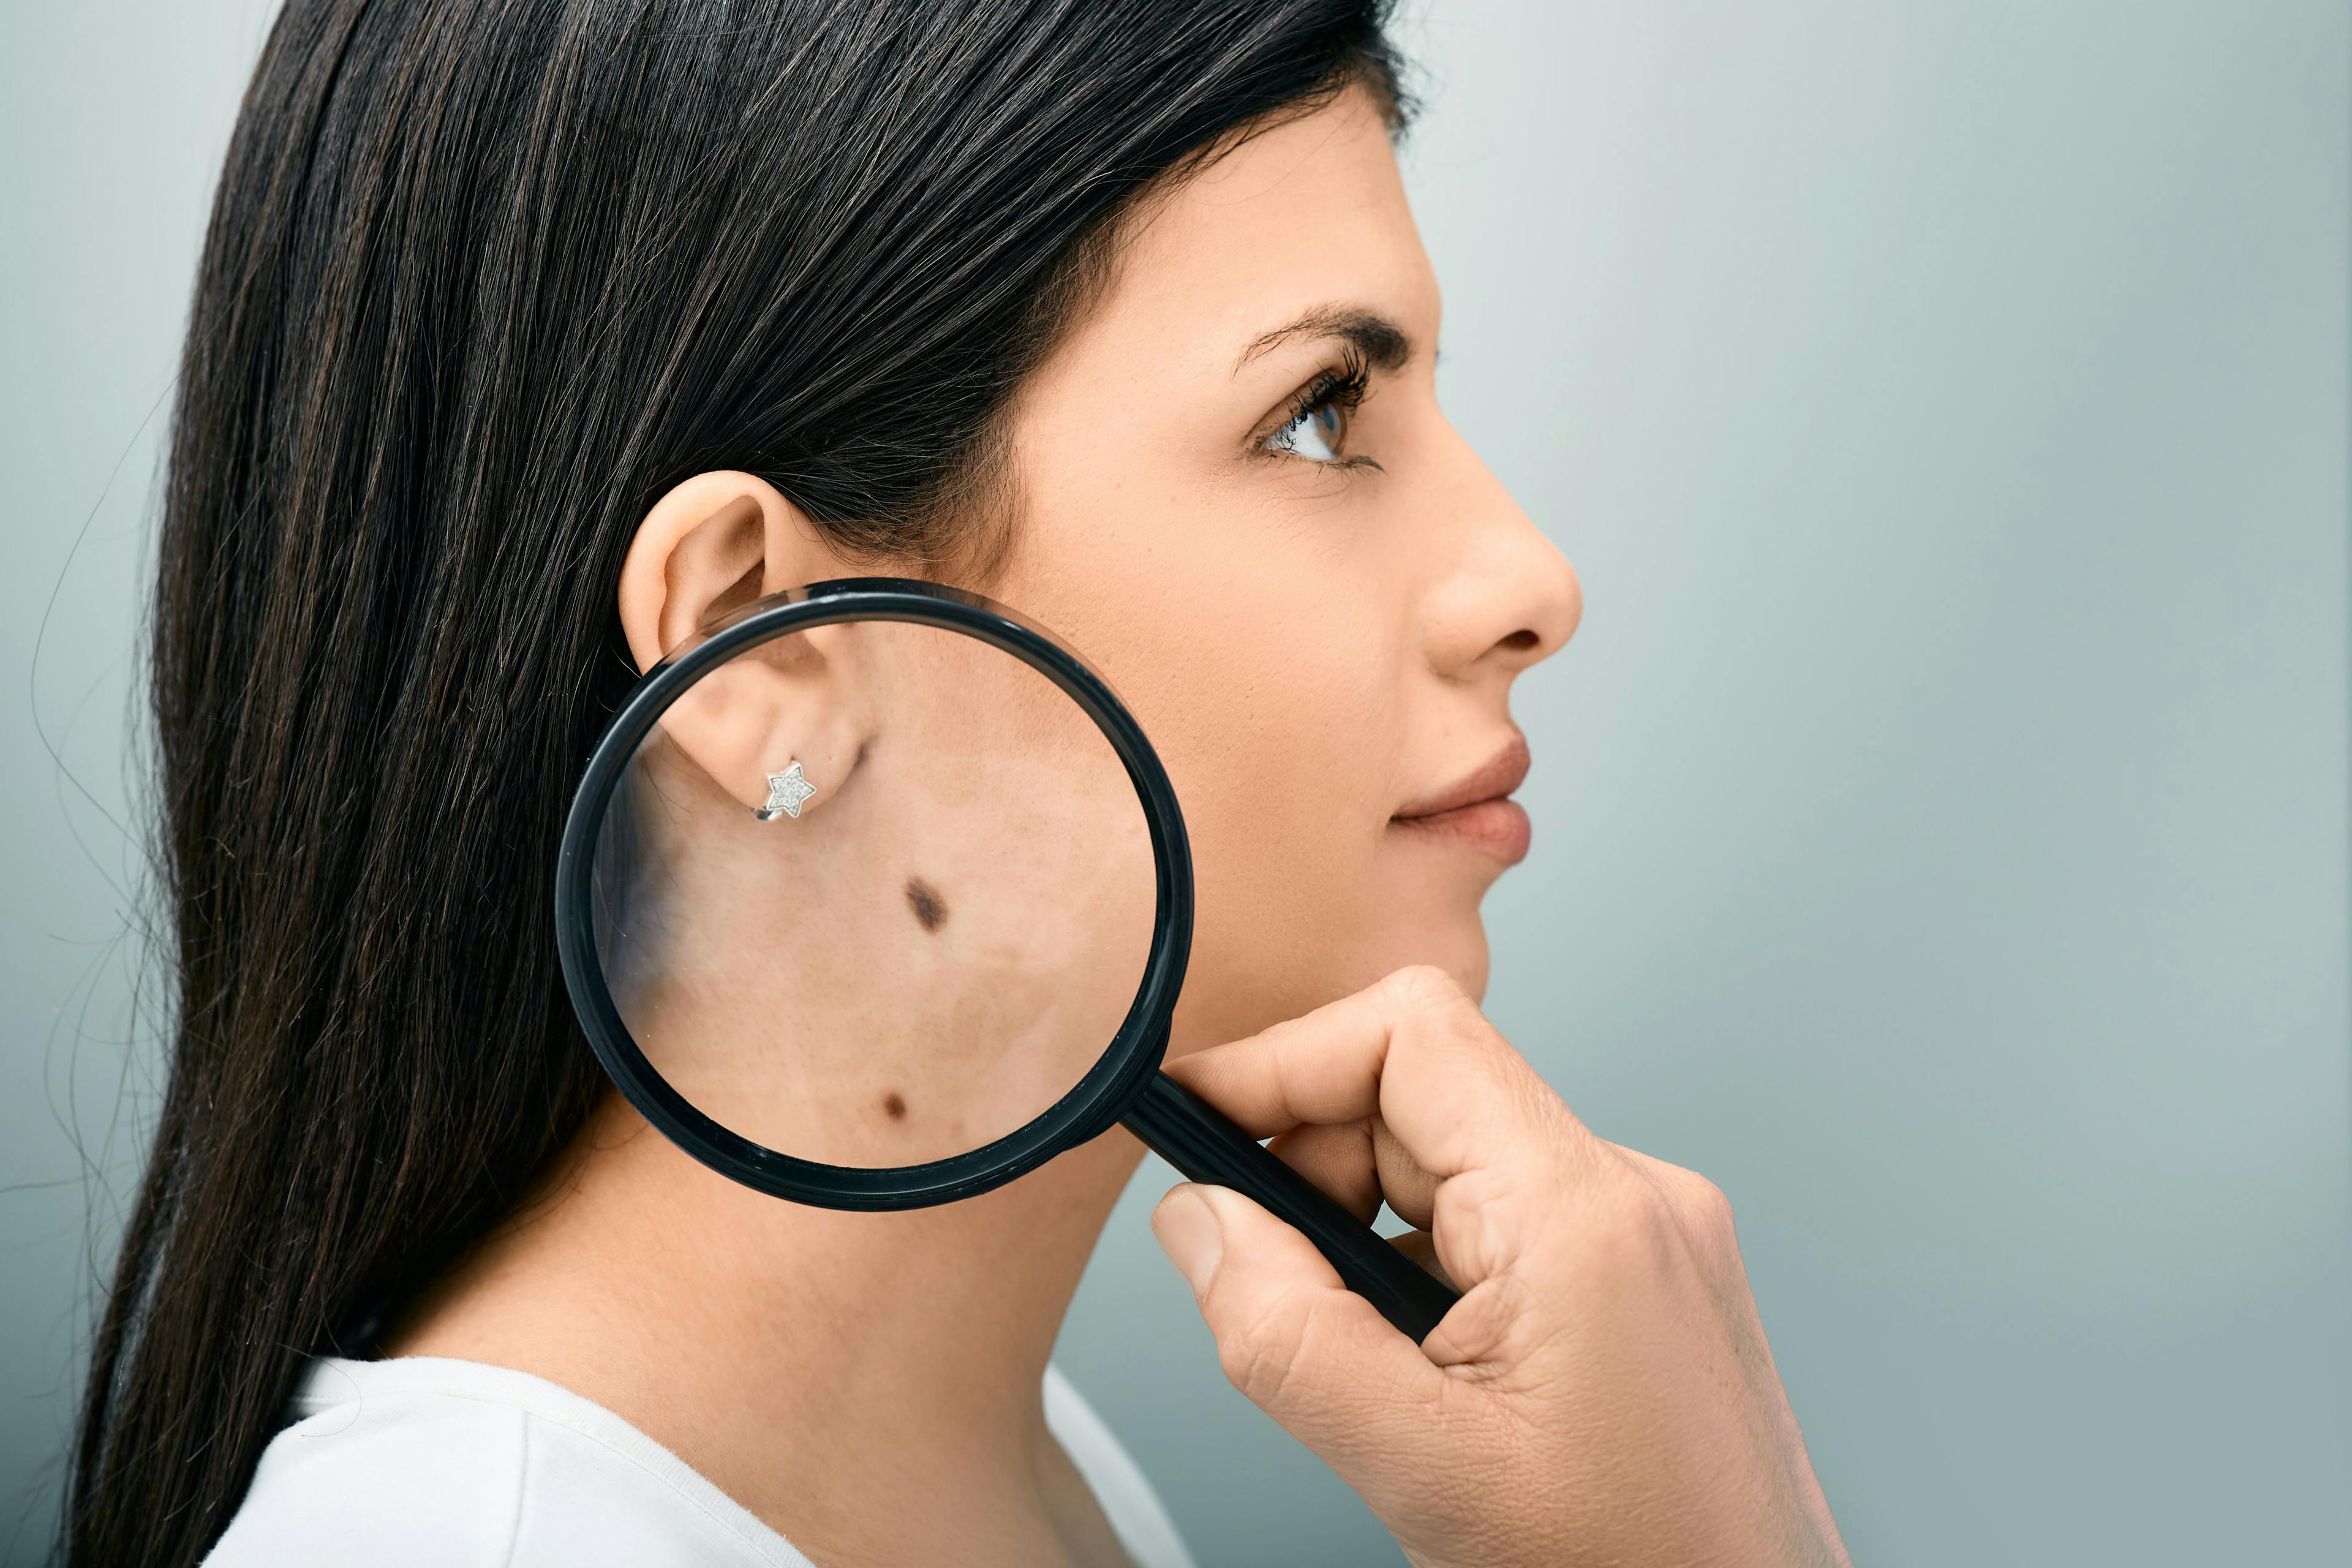 Woman with magnifying glass showing mole and birthmark on her body for prevention of melanoma | Peakstock - stock.adobe.com